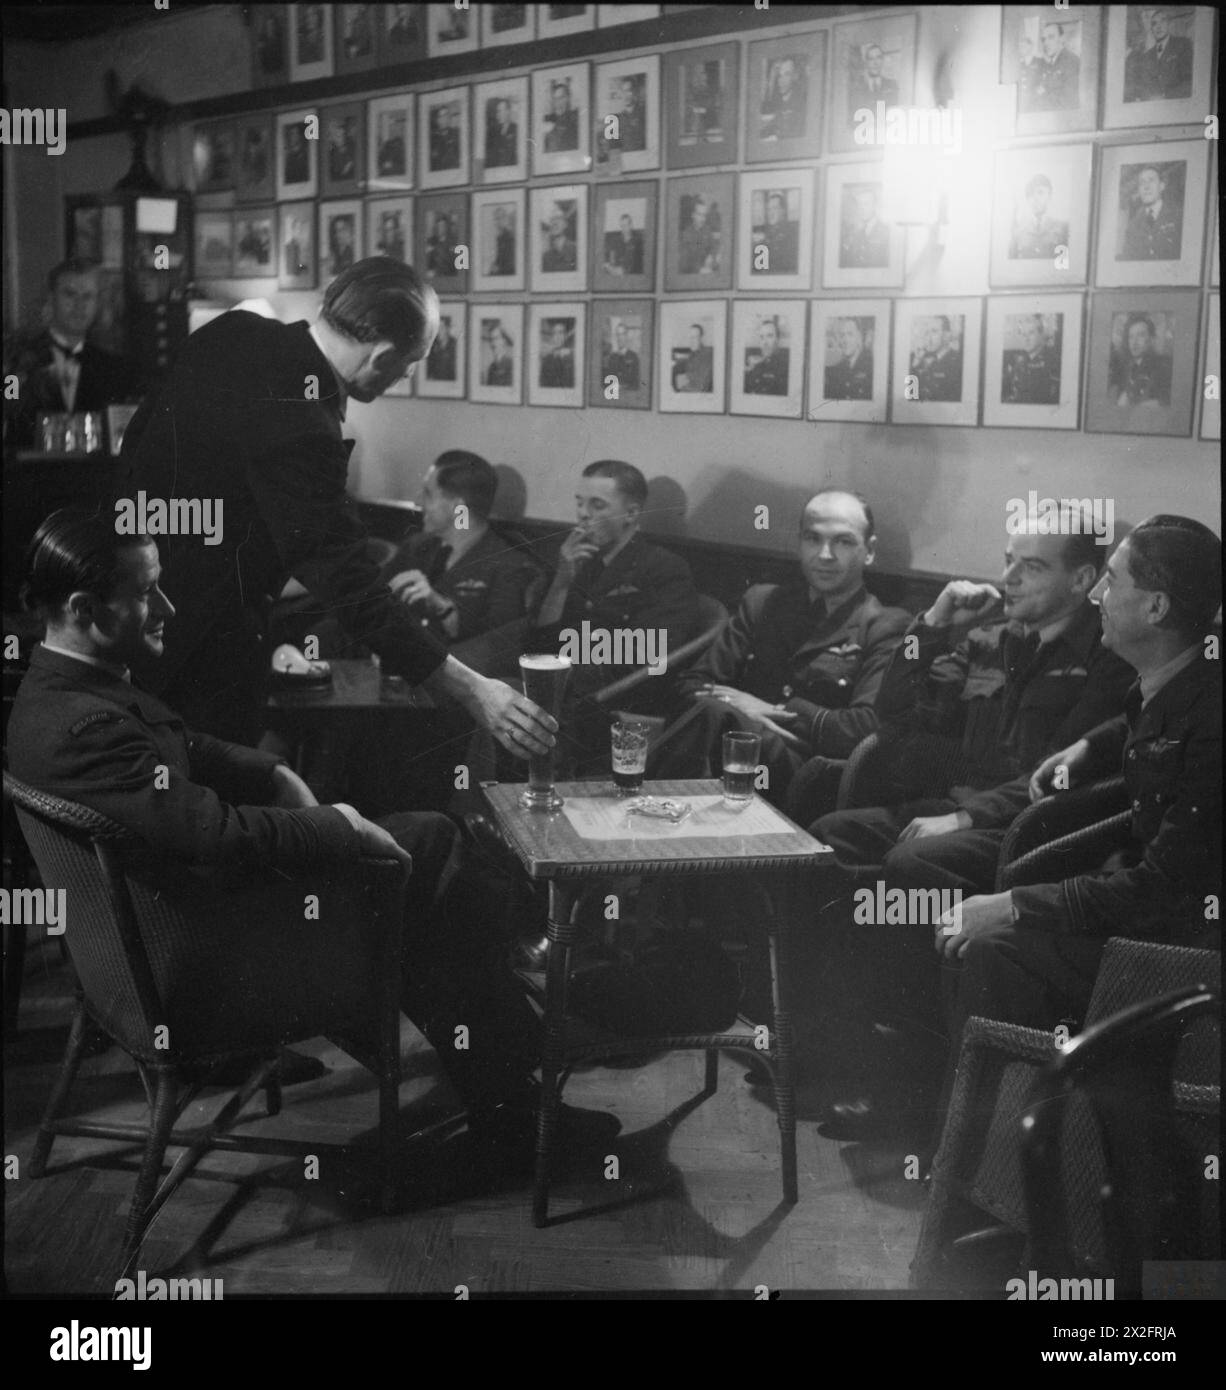 BELGIAN CLUBS AND CAFES IN LONDON: REST, RELAXATION AND ENTERTAINMENT, LONDON, ENGLAND, UK, 1945 - Belgian pilots enjoy a beer, a cigarette and a chat as they relax at 'Aux Neufs Provinces', a club attached to the restaurant 'Chez Gaston', near Victoria Station. The wall behind them is lined with portrait photographs of airmen Stock Photo